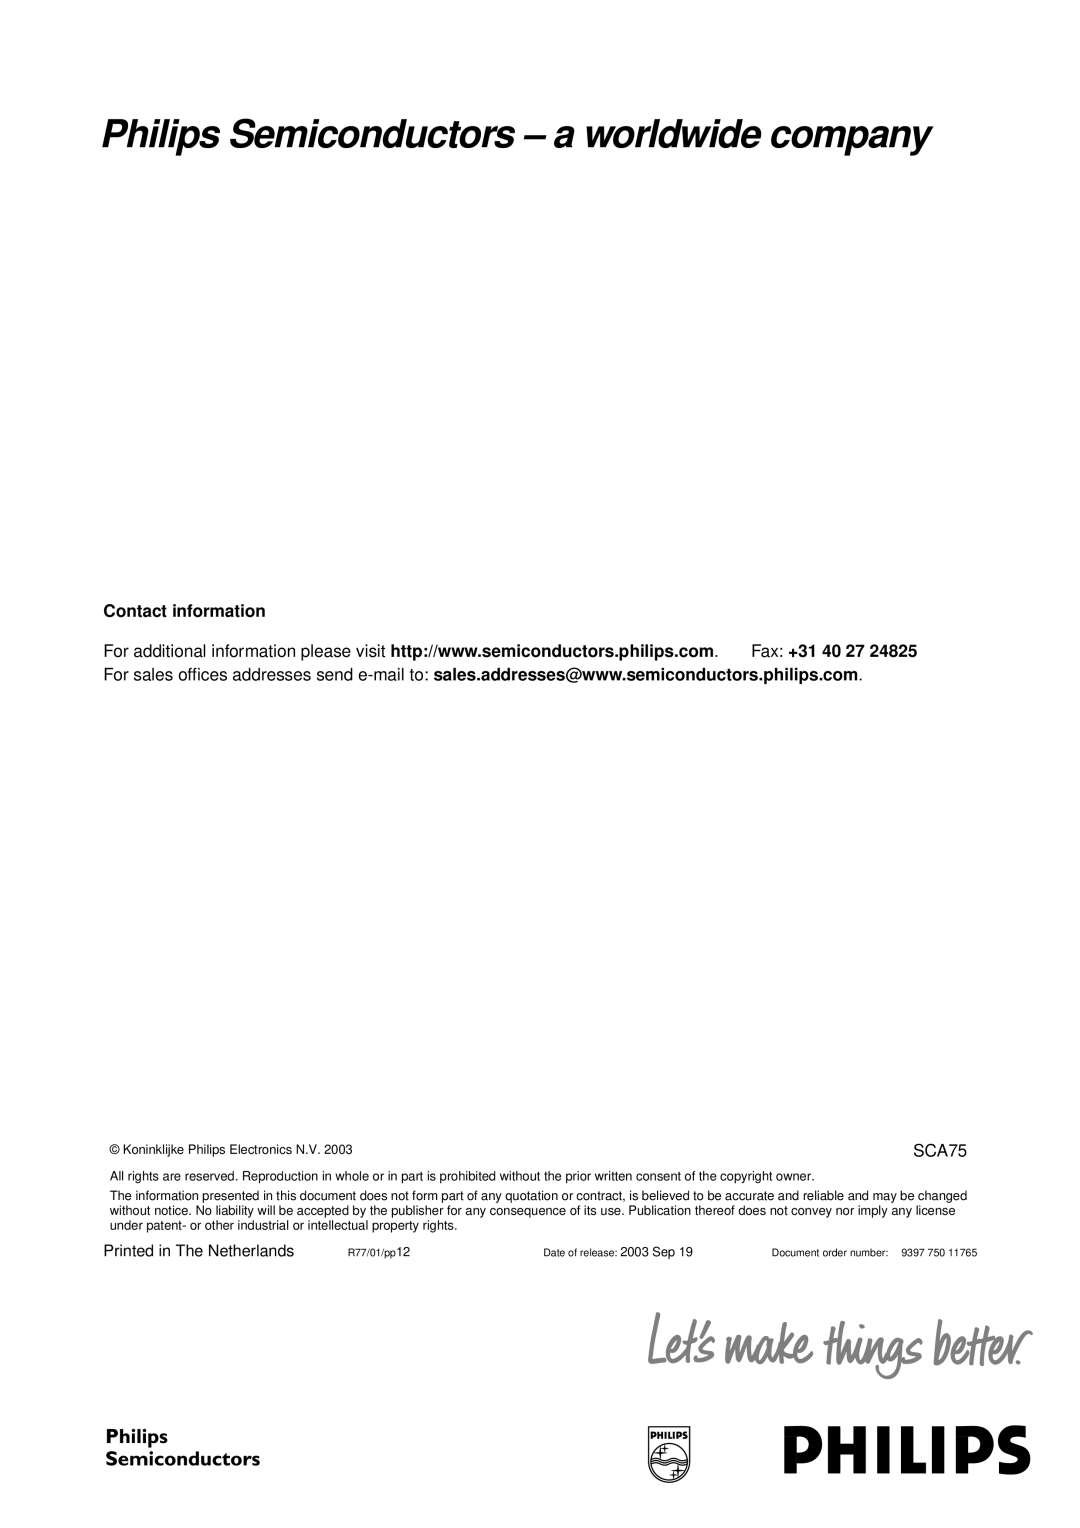 Philips BGA6589 manual Philips Semiconductors - a worldwide company, Contact information, Fax +31, SCA75 